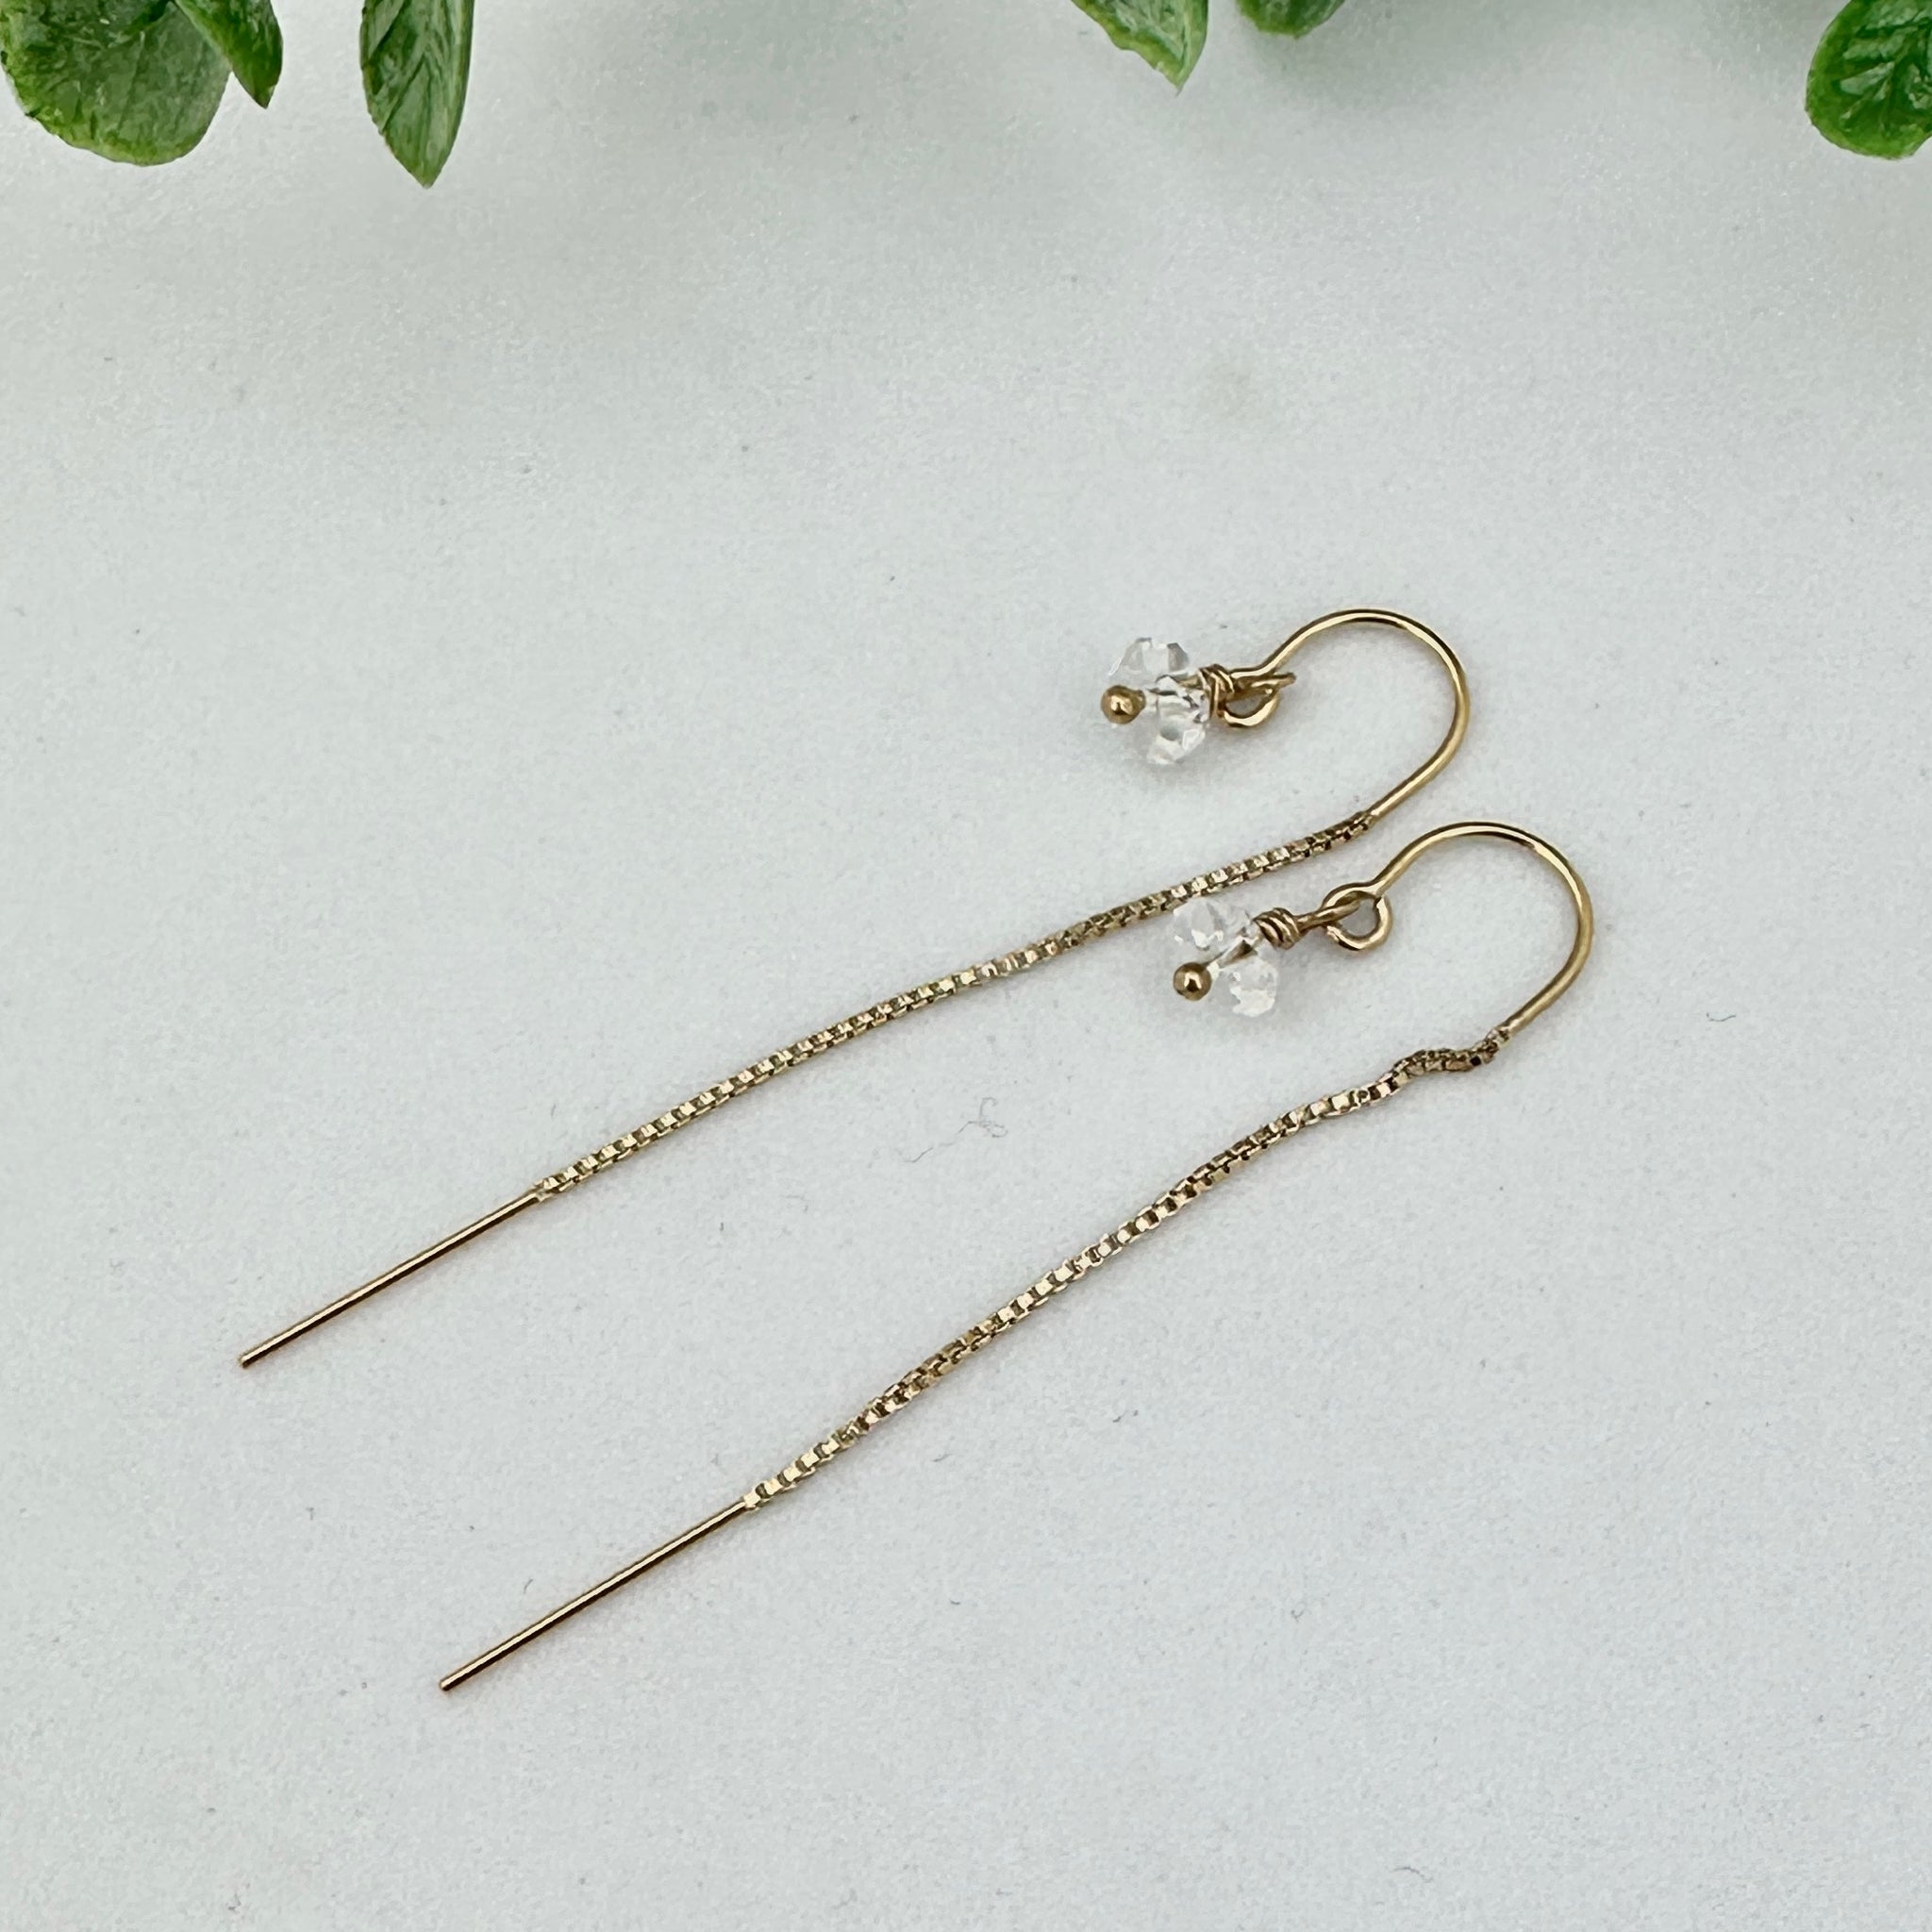 Amazon.com: Spiral Threader Earrings, 925 Sterling Silver, Drop Dangle  Handmade Twisted Linear Curved Minimal Everyday Earrings (Silver) :  Handmade Products